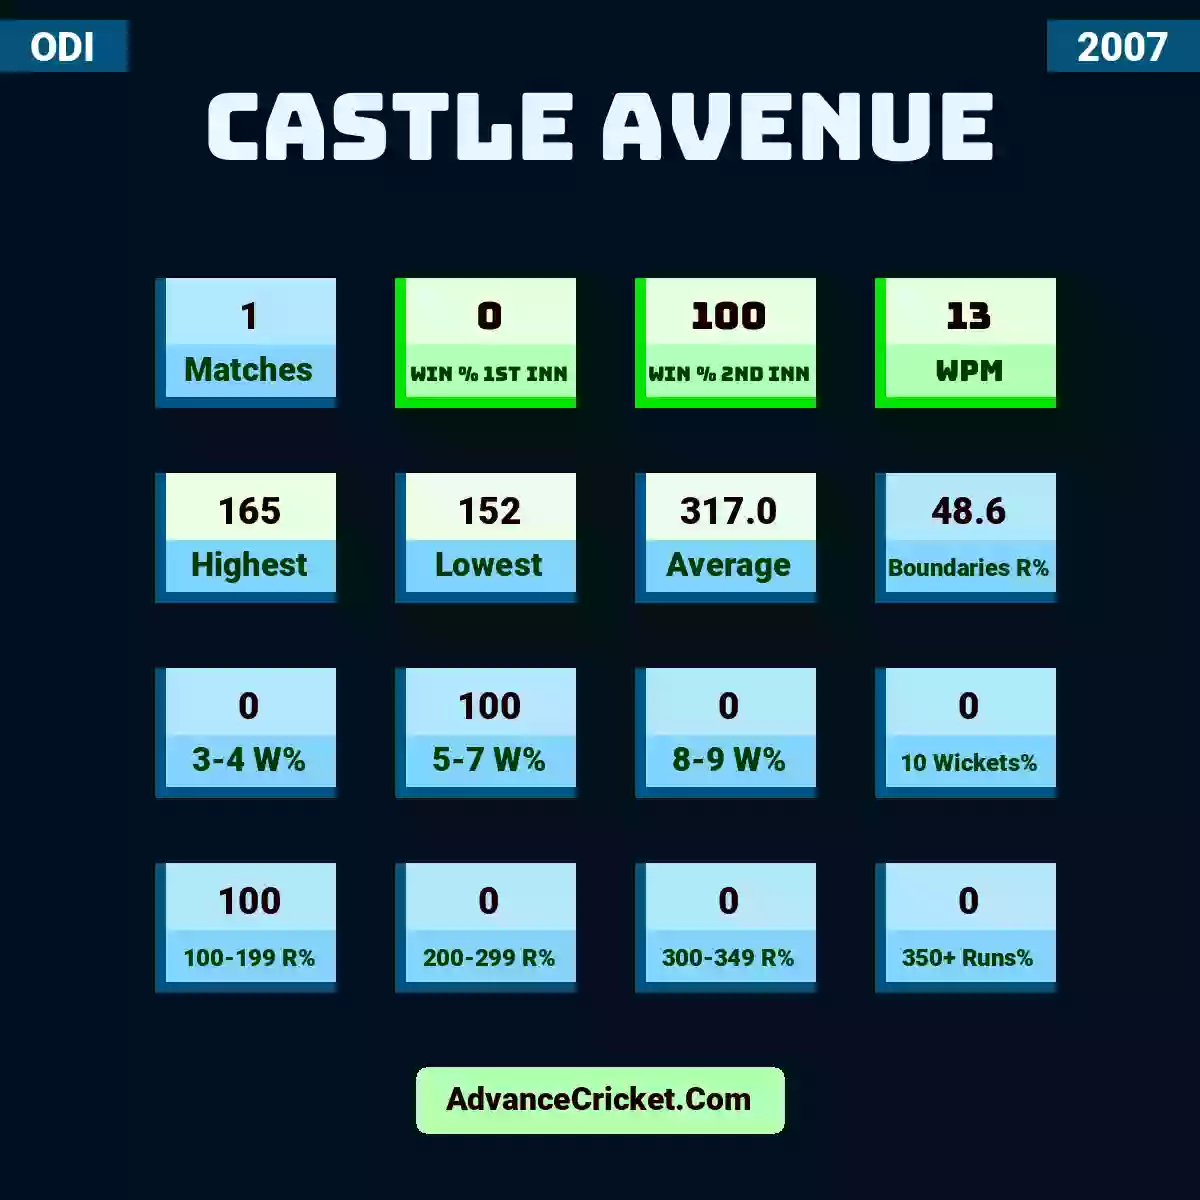 Image showing Castle Avenue with Matches: 1, Win % 1st Inn: 0, Win % 2nd Inn: 100, WPM: 13, Highest: 165, Lowest: 152, Average: 317.0, Boundaries R%: 48.6, 3-4 W%: 0, 5-7 W%: 100, 8-9 W%: 0, 10 Wickets%: 0, 100-199 R%: 100, 200-299 R%: 0, 300-349 R%: 0, 350+ Runs%: 0.